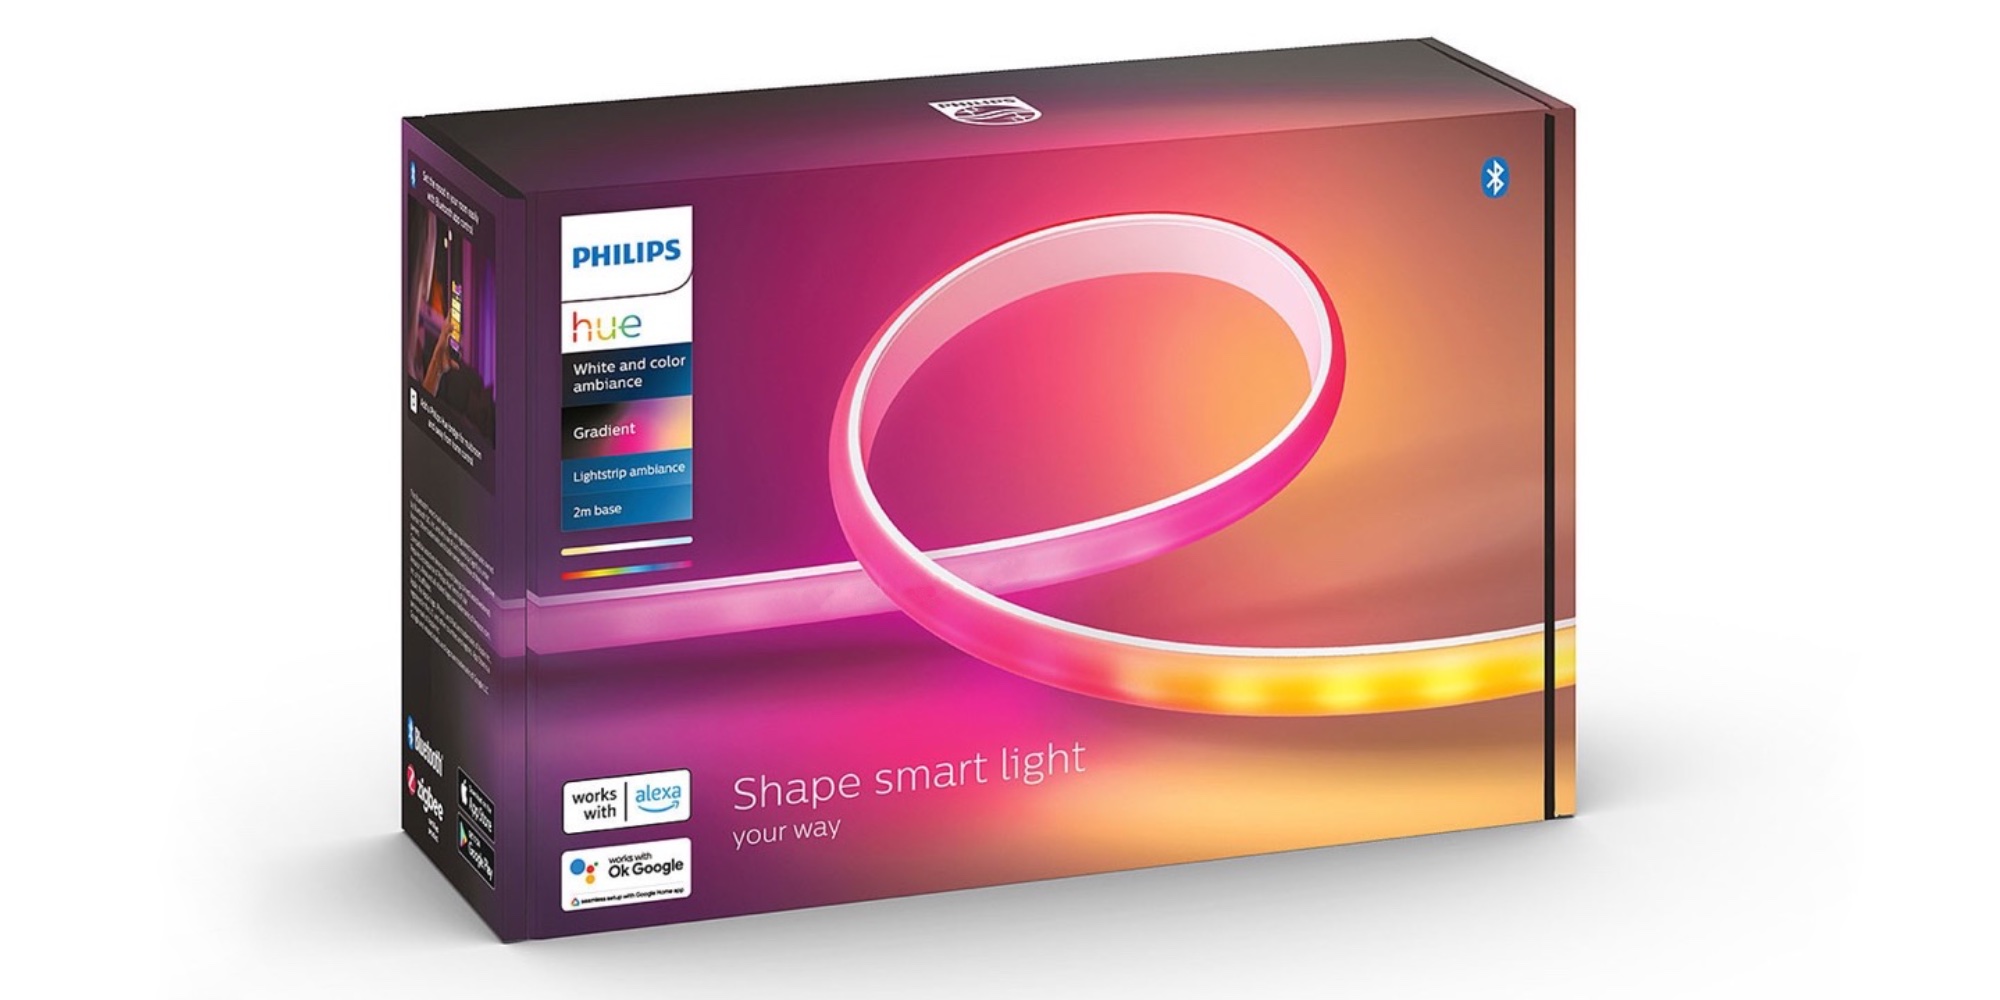 NEW Philips Hue Gradient Lightstrip Ambiance - Fall Product Lineup